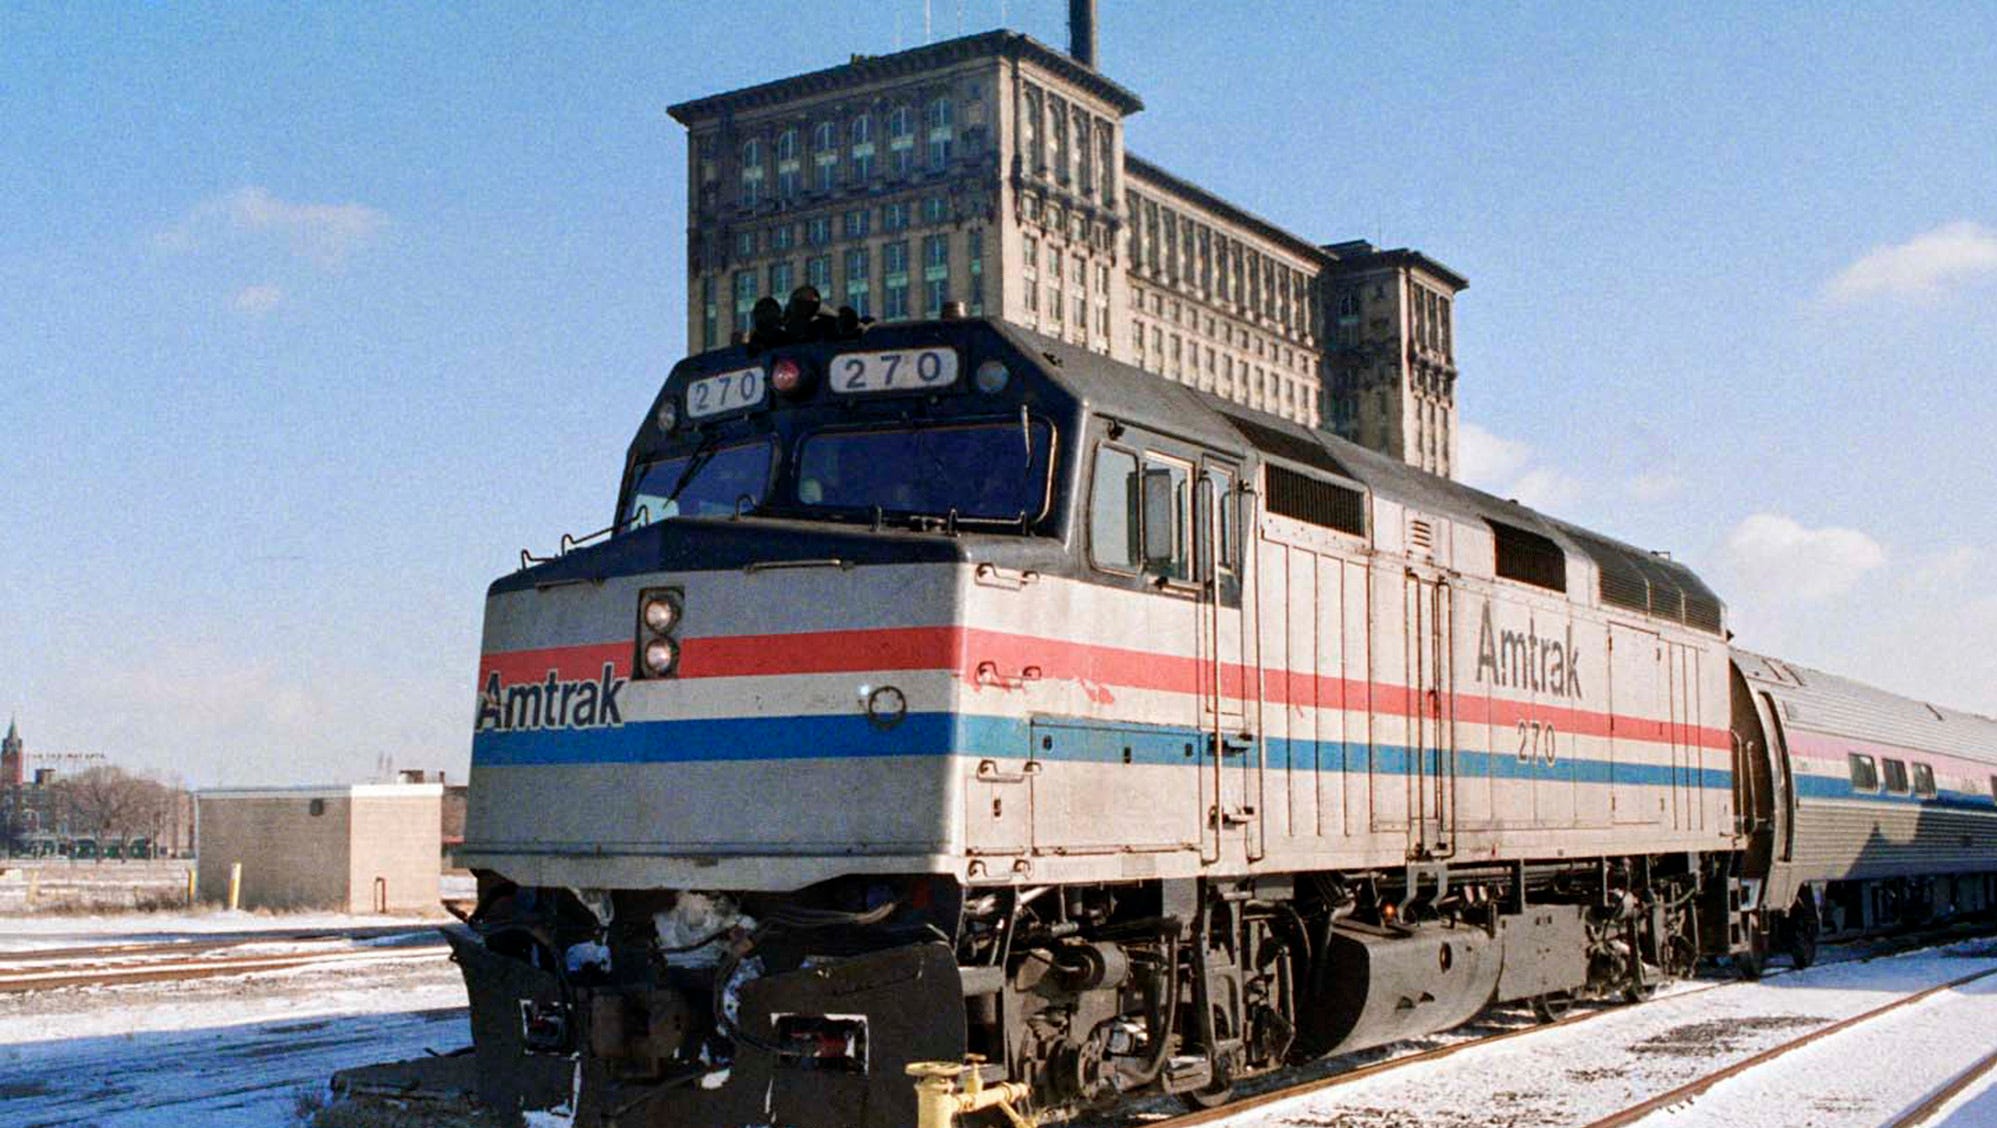 The 11:40 to Chicago is the last train to leave Michigan Central Depot on Jan. 5, 1988.